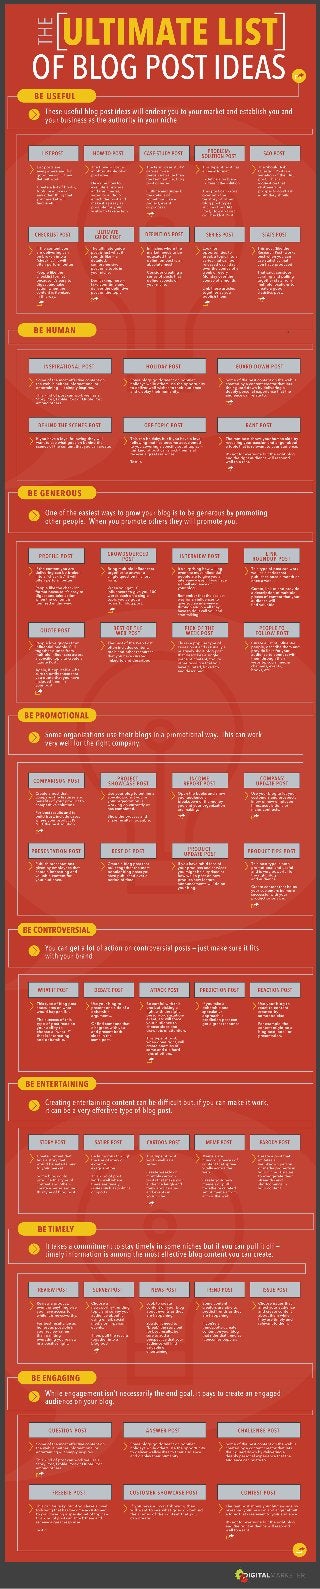 The Ultimate List of Blog Post Ideas Infographic